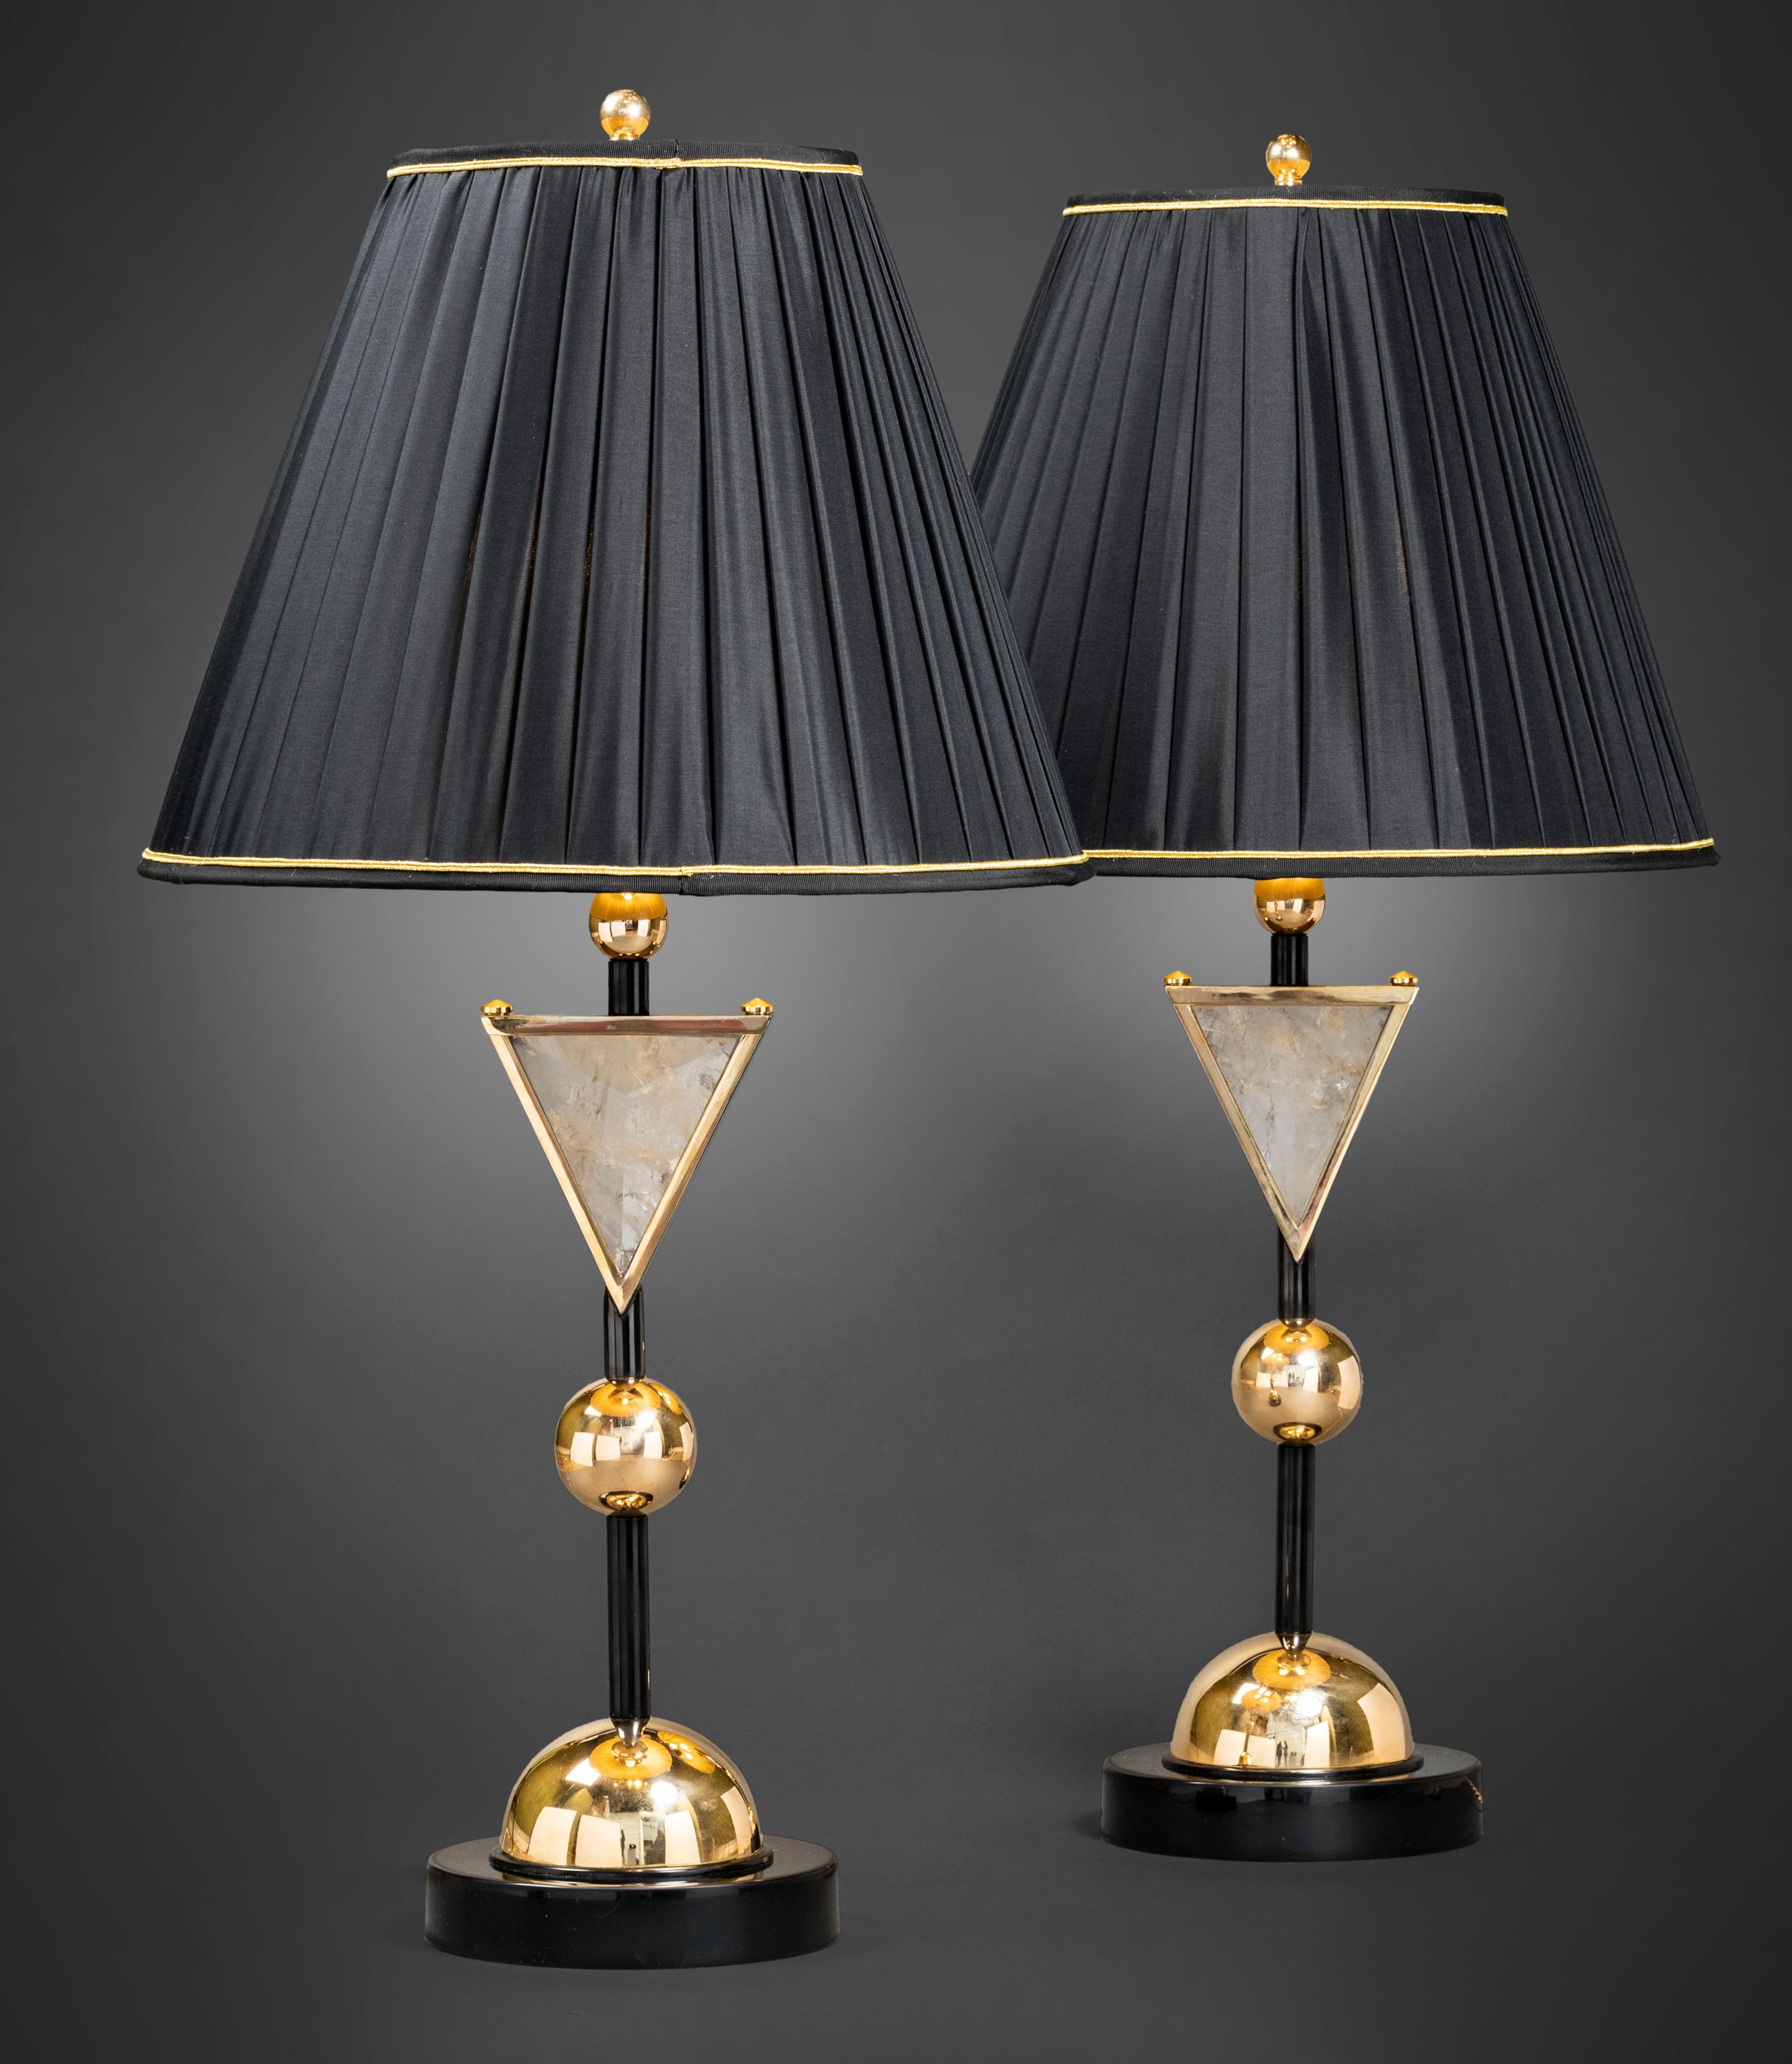 Original creation by Alexandre Vossion.
Made in the same spirit than the Diadem Chandelier.
Rock crystal stone, brass, black chrome, 24-karat gold (not polished brass),customized lampshades.
This model could be made in your finition (silver